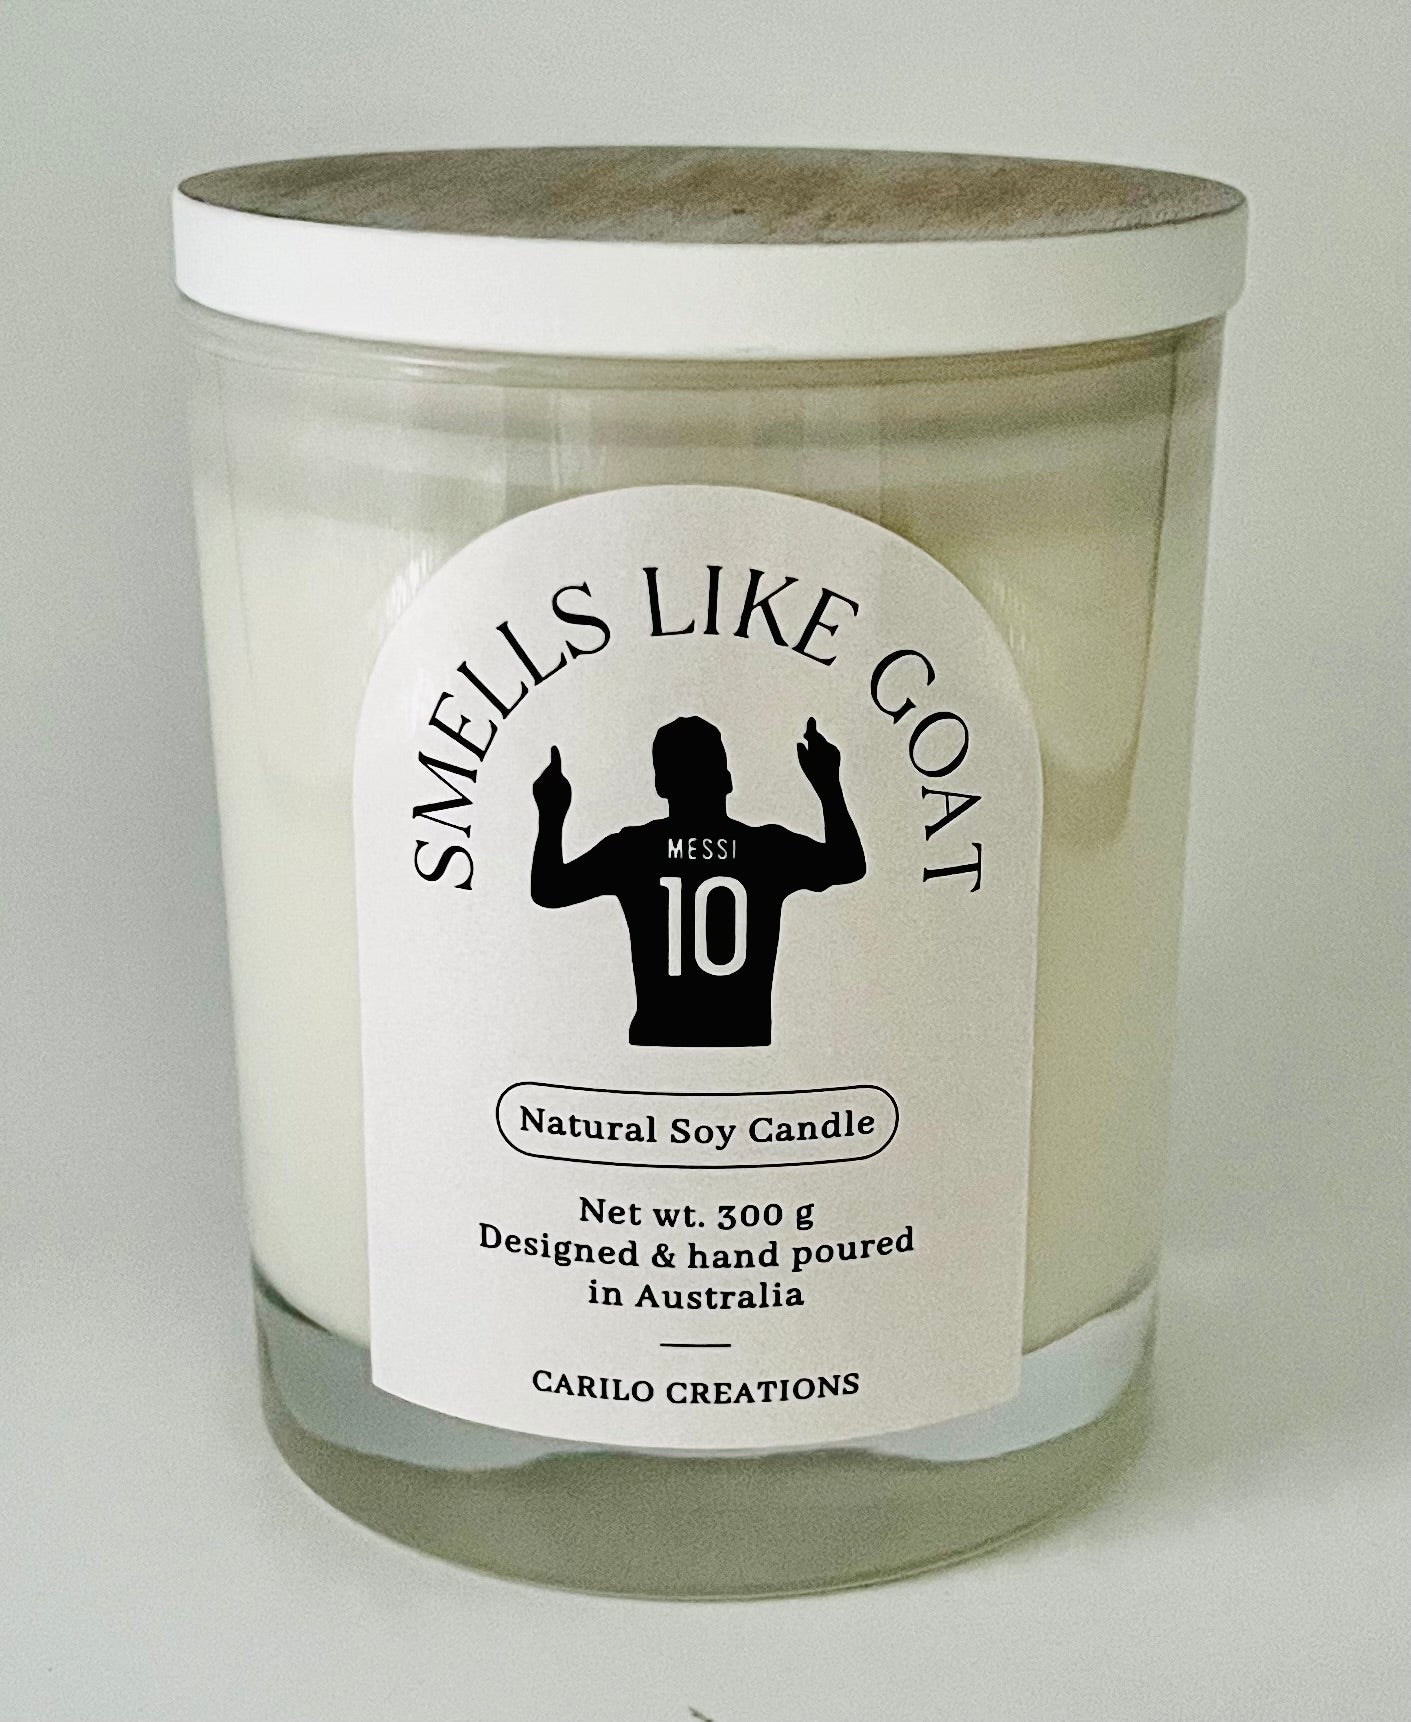 "SMELLS LIKE GOAT" SCENTED CANDLE- WHITE JAR 300g